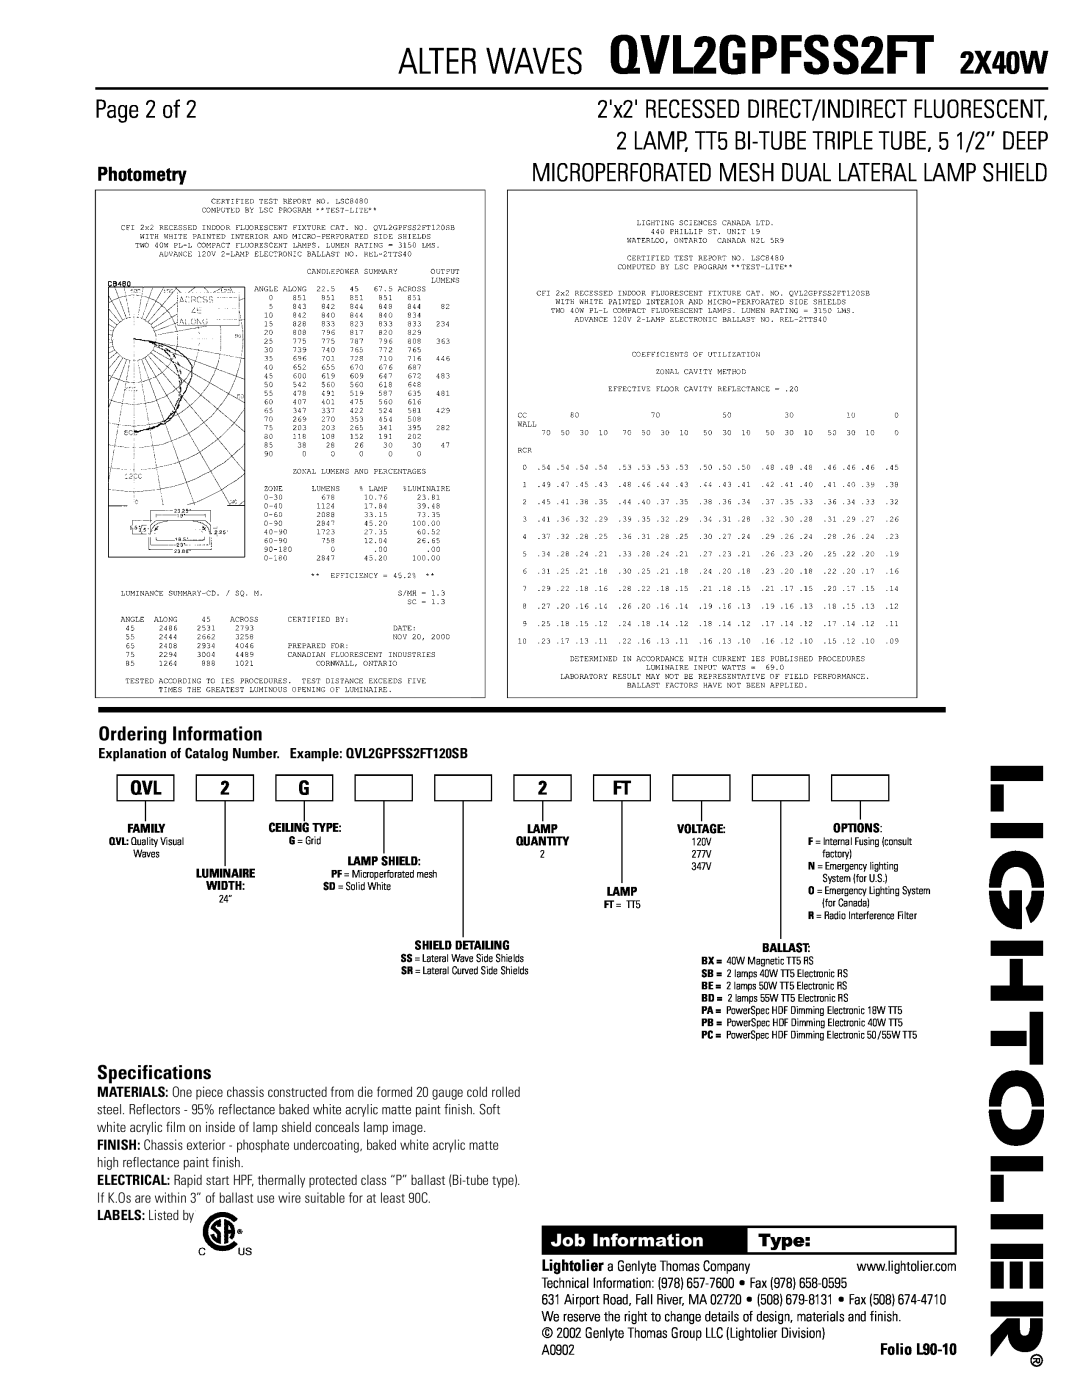 Lightolier QVL2GPFSS2FT 2X40W Page 2 of, Photometry, Microperforated Mesh Dual Lateral Lamp Shield, Ordering Information 